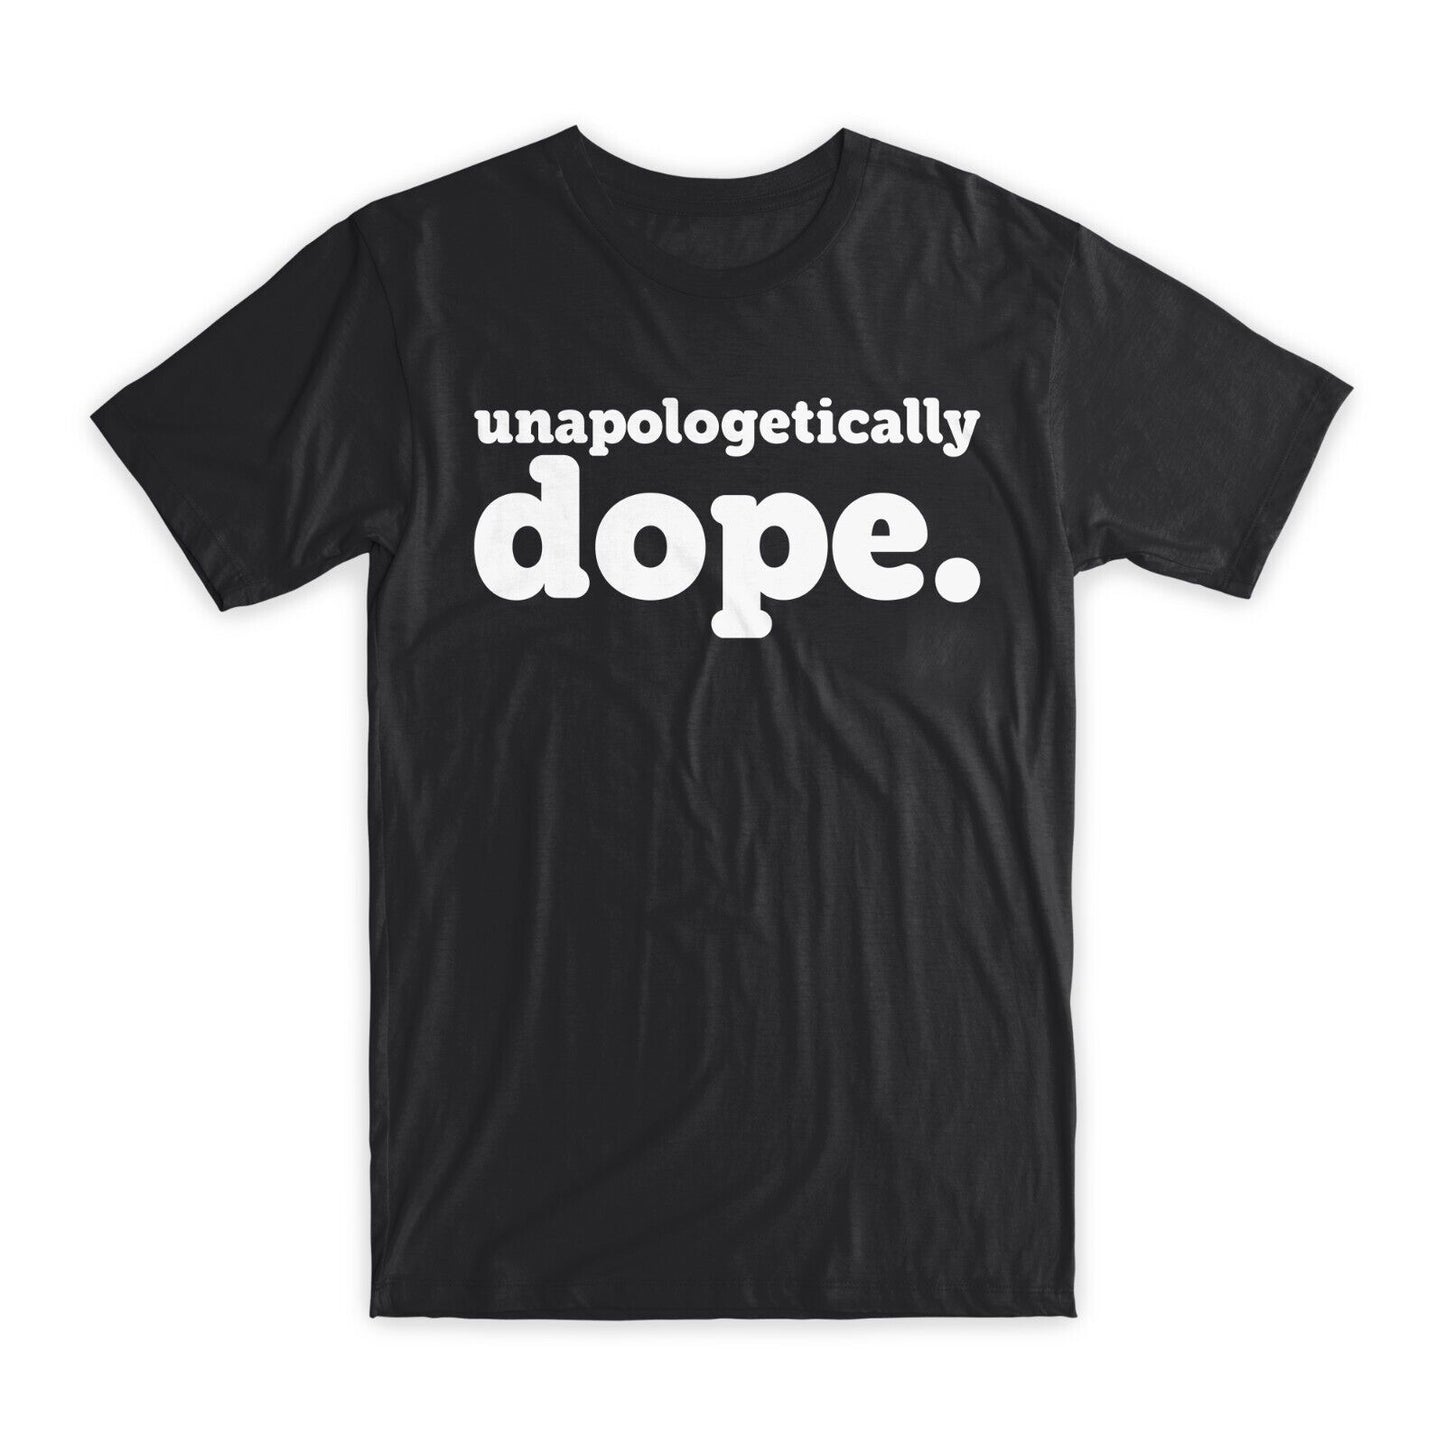 Unapologetically Dope T-Shirt Premium Soft Cotton Crew Neck Funny Tees Gifts NEW